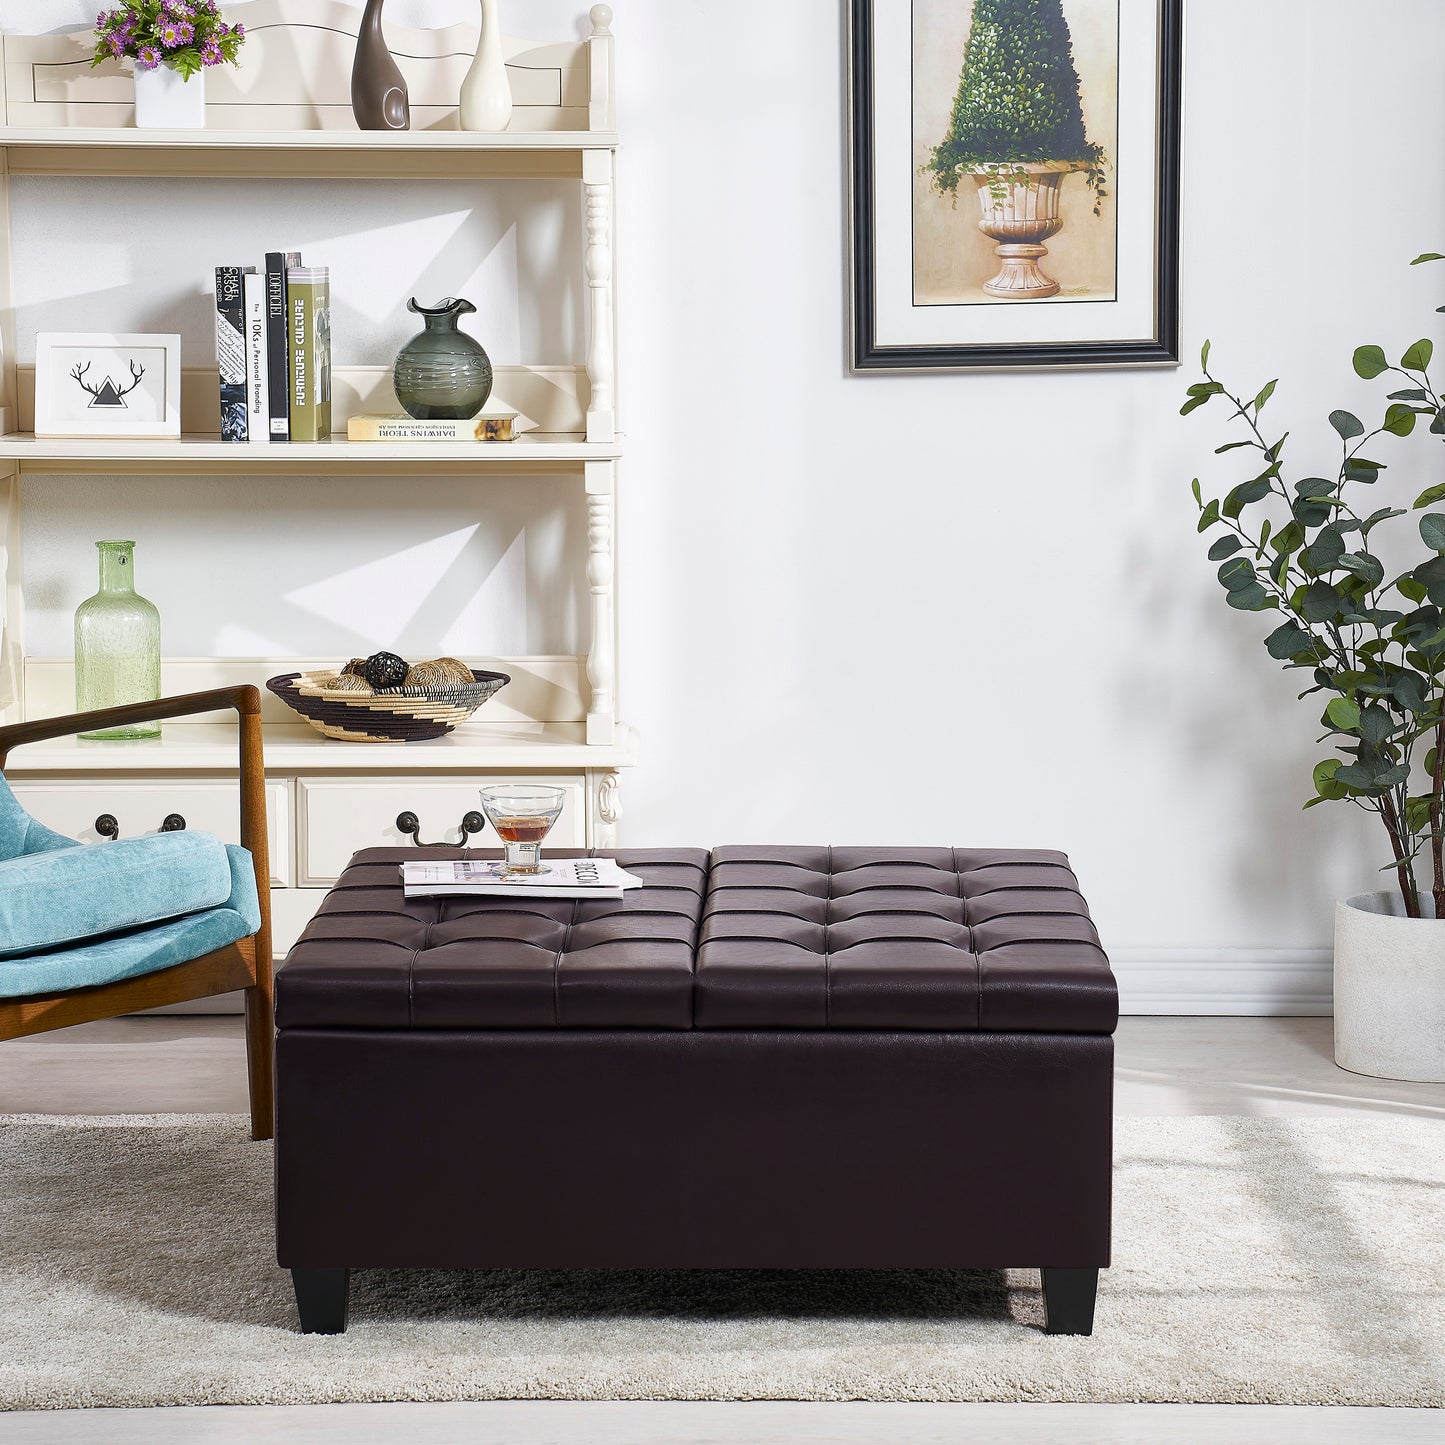 Elegant Dark Brown Large Square Faux Leather Ottoman with Storage